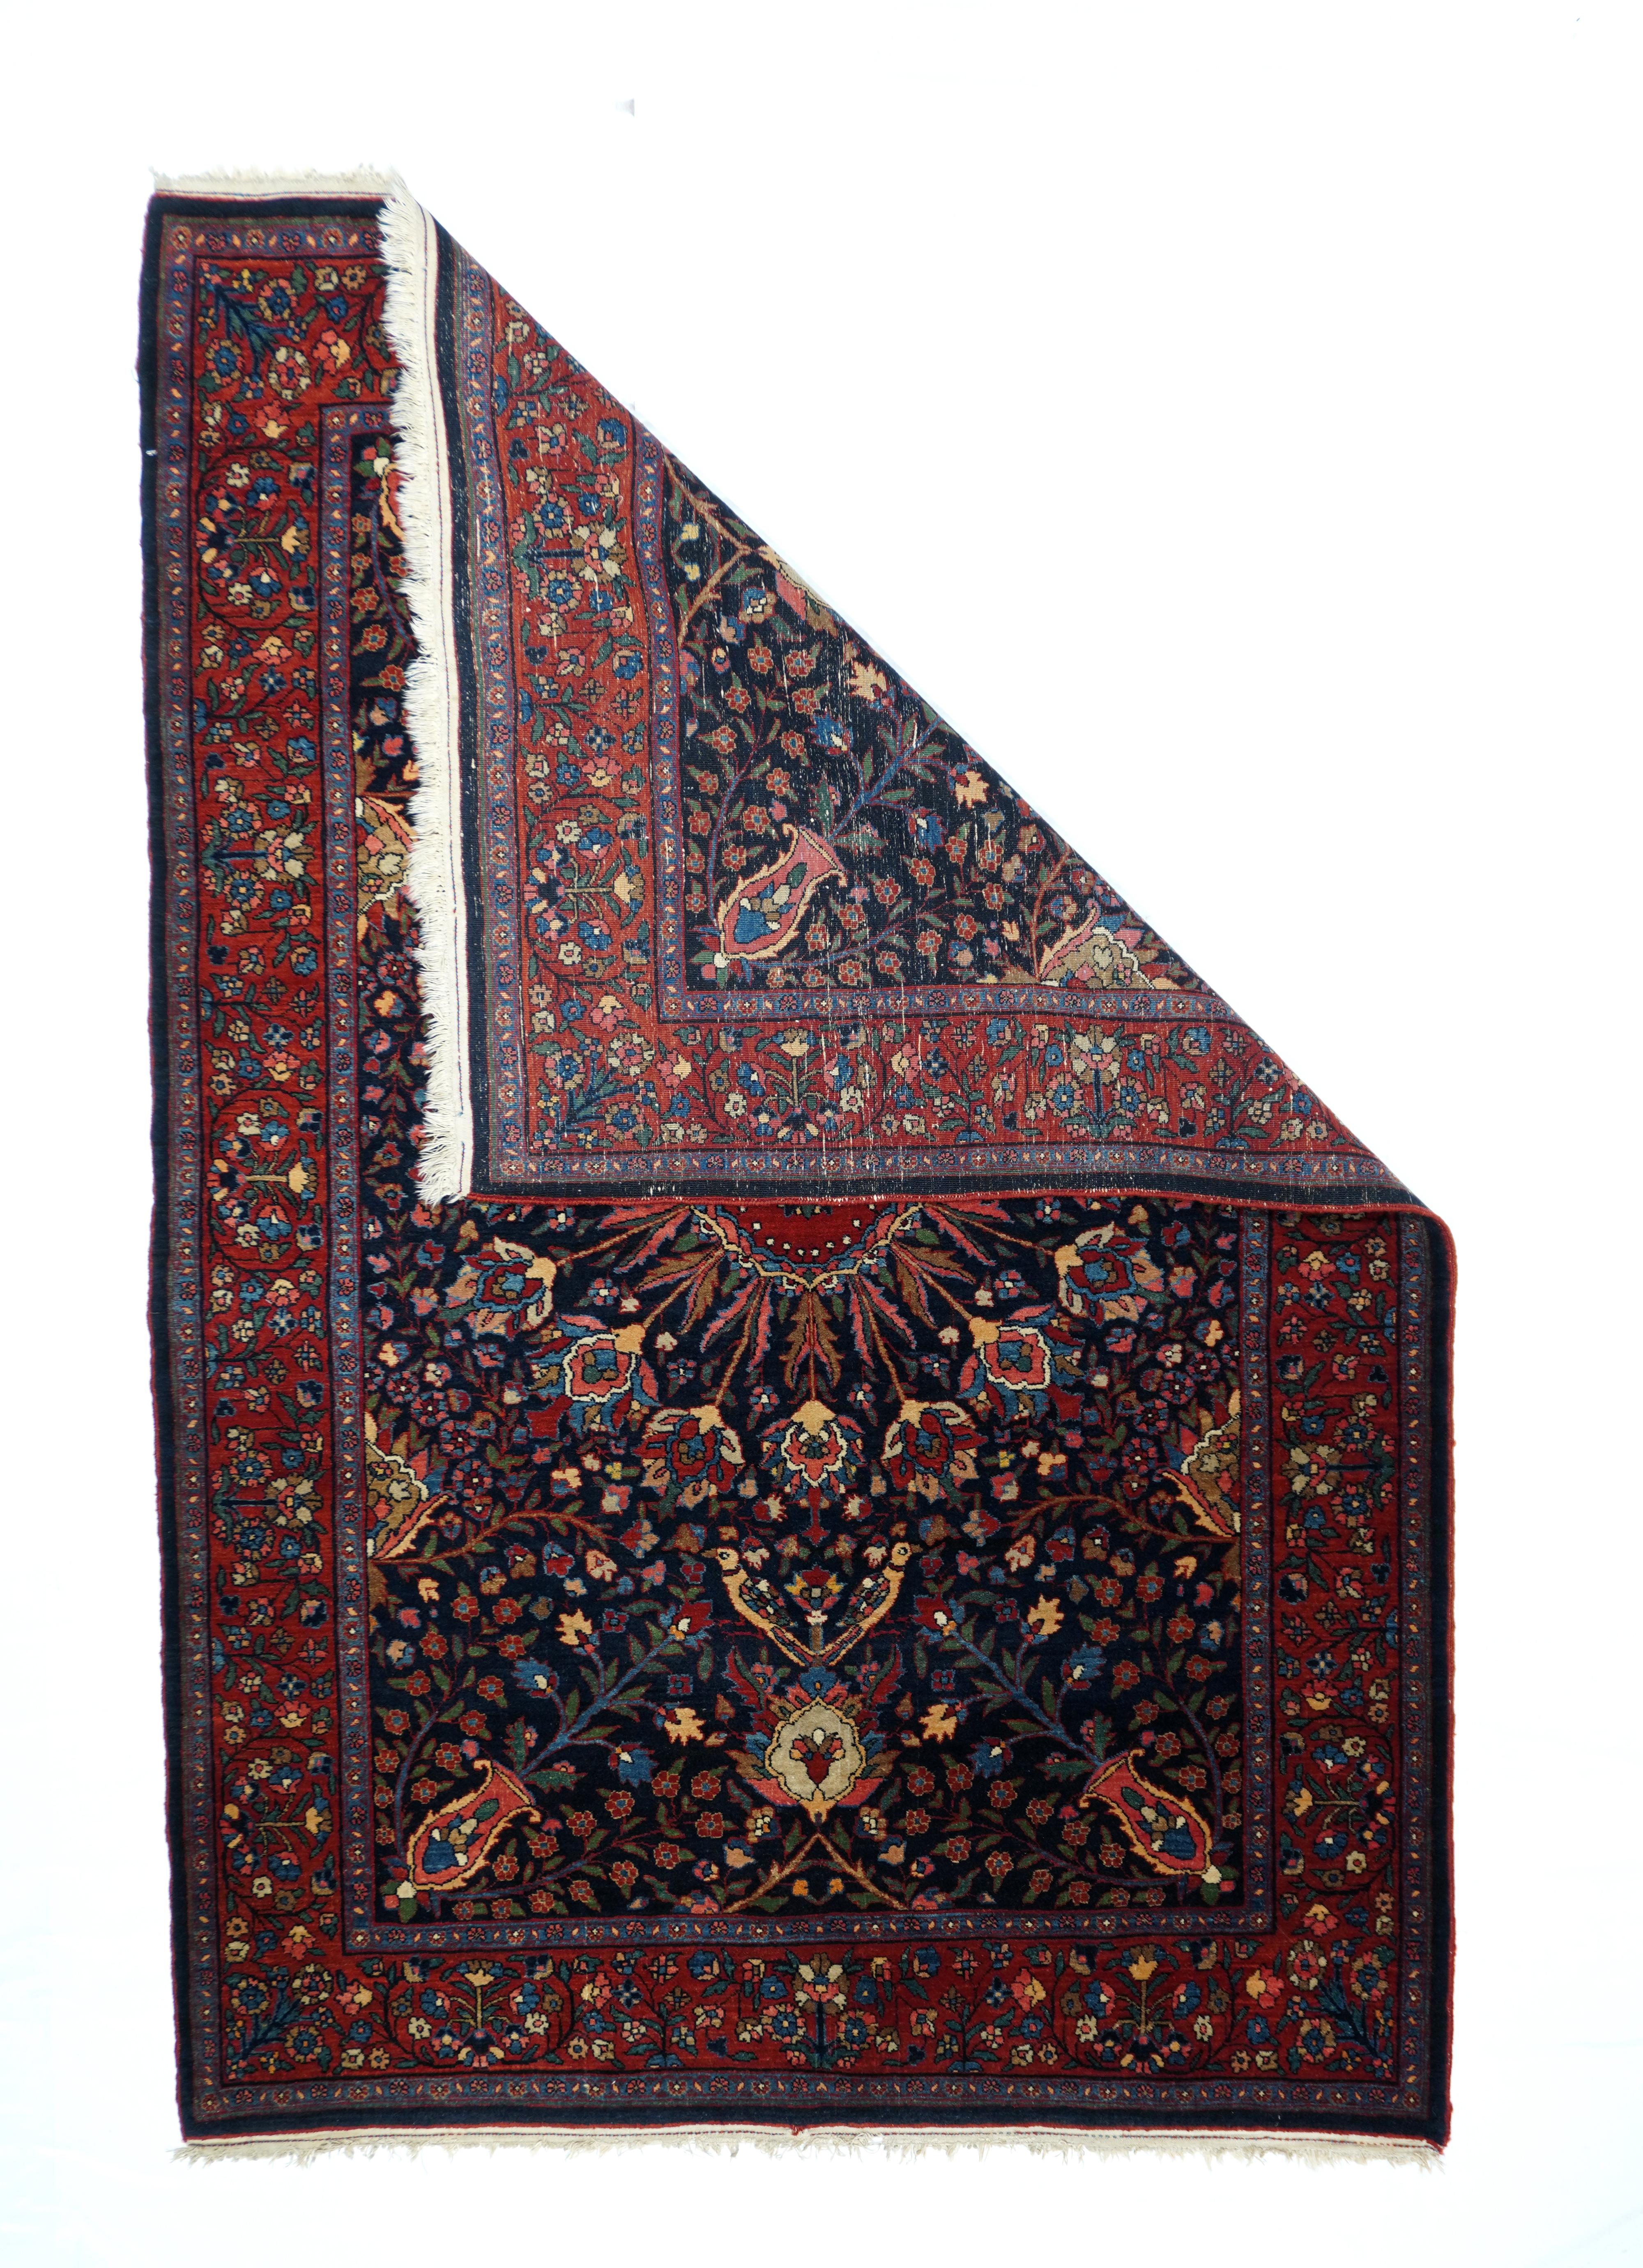 This well-woven Kurdish town scatter shows a radiating 16-palmette and leaf flowerhead pattern on a rich navy ground. Field corner diagonal vases. Wine red border of rosette sprays and upright whole flowers. Compact construction with short, but